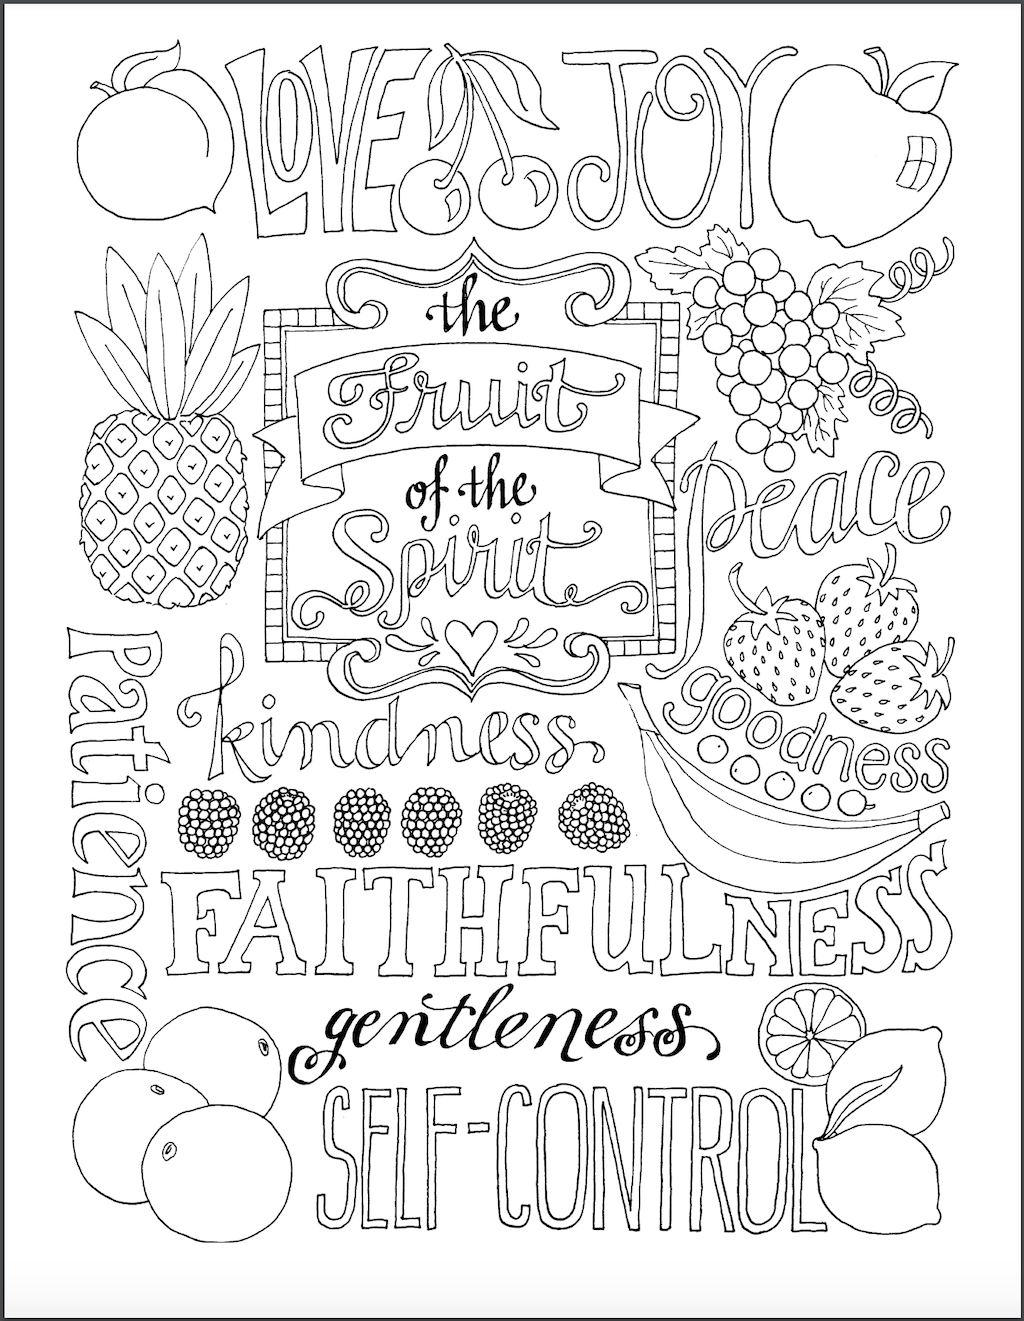 fruits-of-the-spirit-printable-that-are-geeky-derrick-website